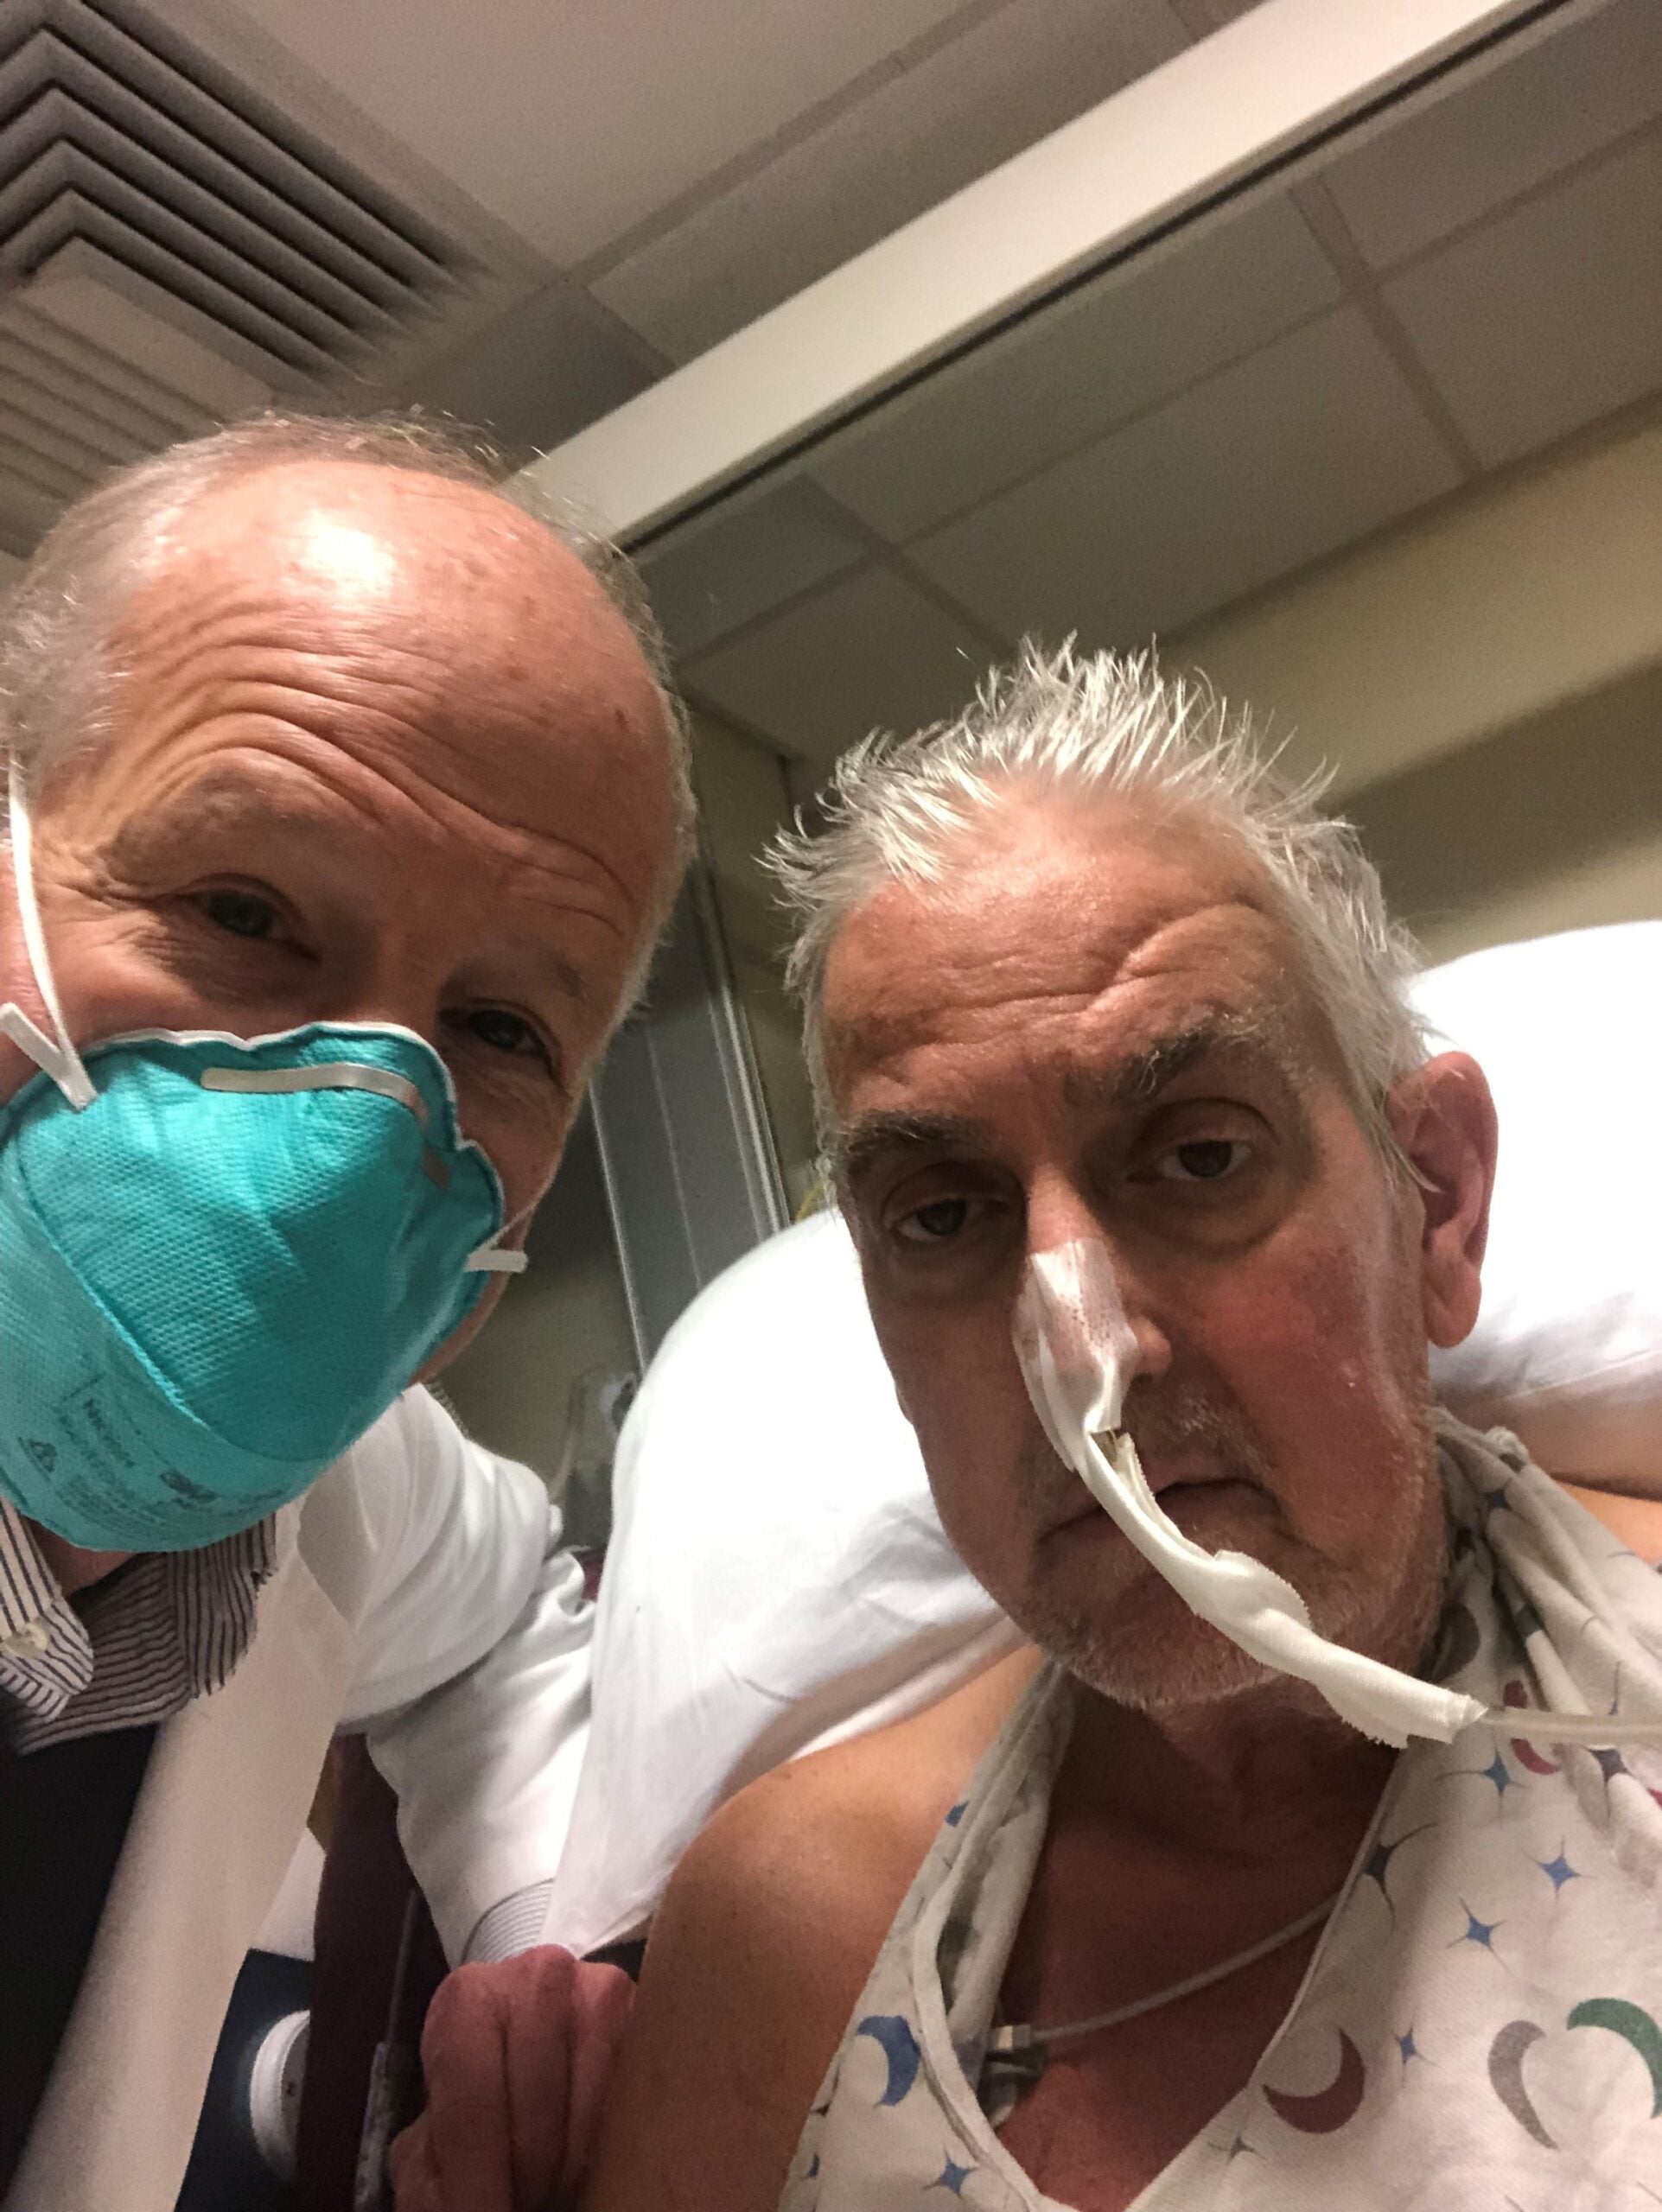 at a hospital room, a male surgeon with a blue medical mask on the left stands next to his patient, an older man sitting in bed in a gown with a oxygen tube hooked to his nose.